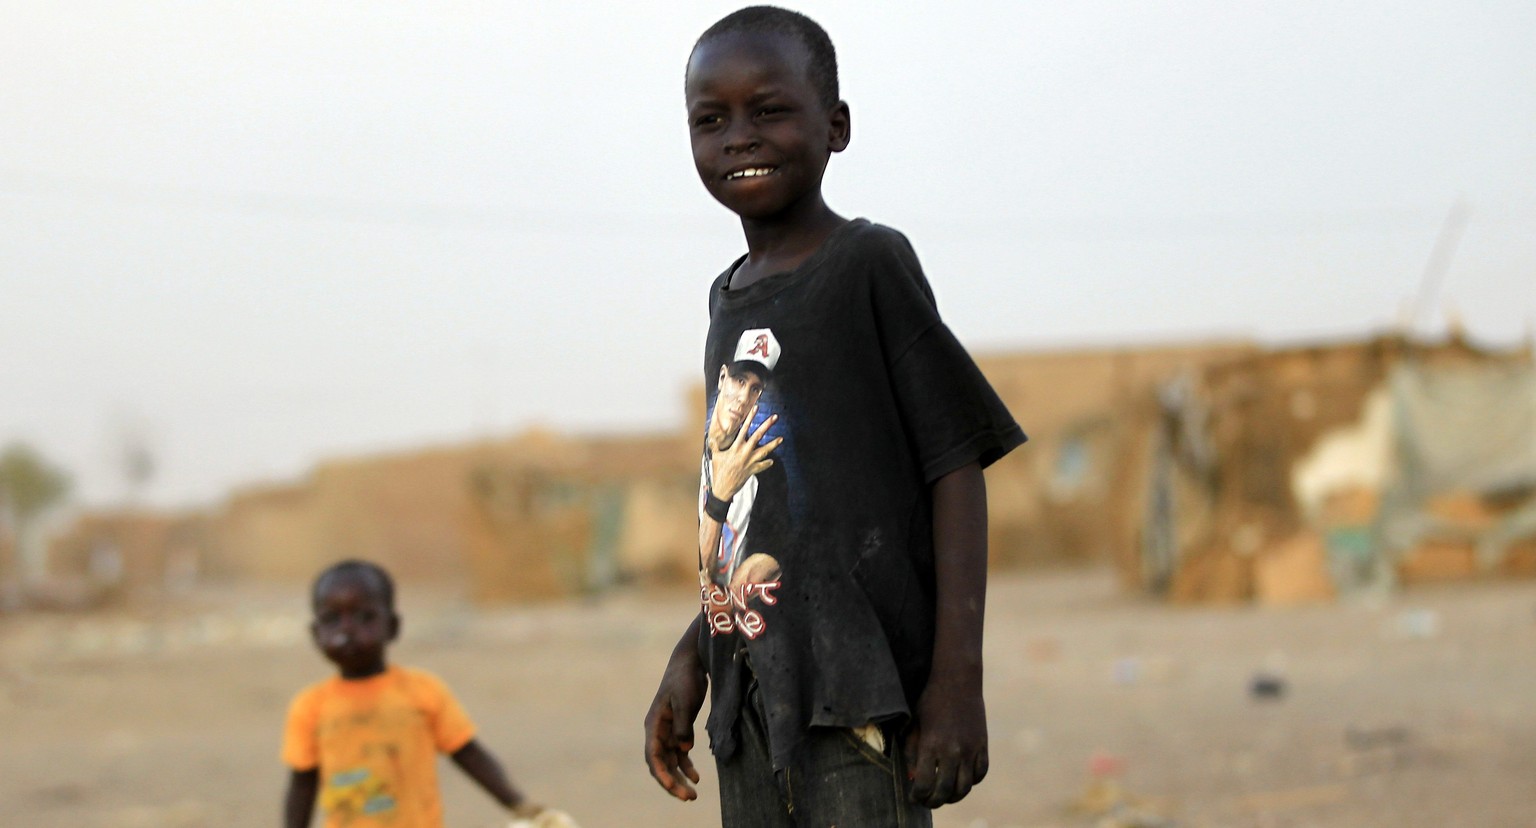 Children of South Sudanese stand at Mandela IDP (internally displaced persons) camp on the outskirts of Khartoum June 15, 2014. The Day of the African Child has been celebrated annually on June 16, si ...